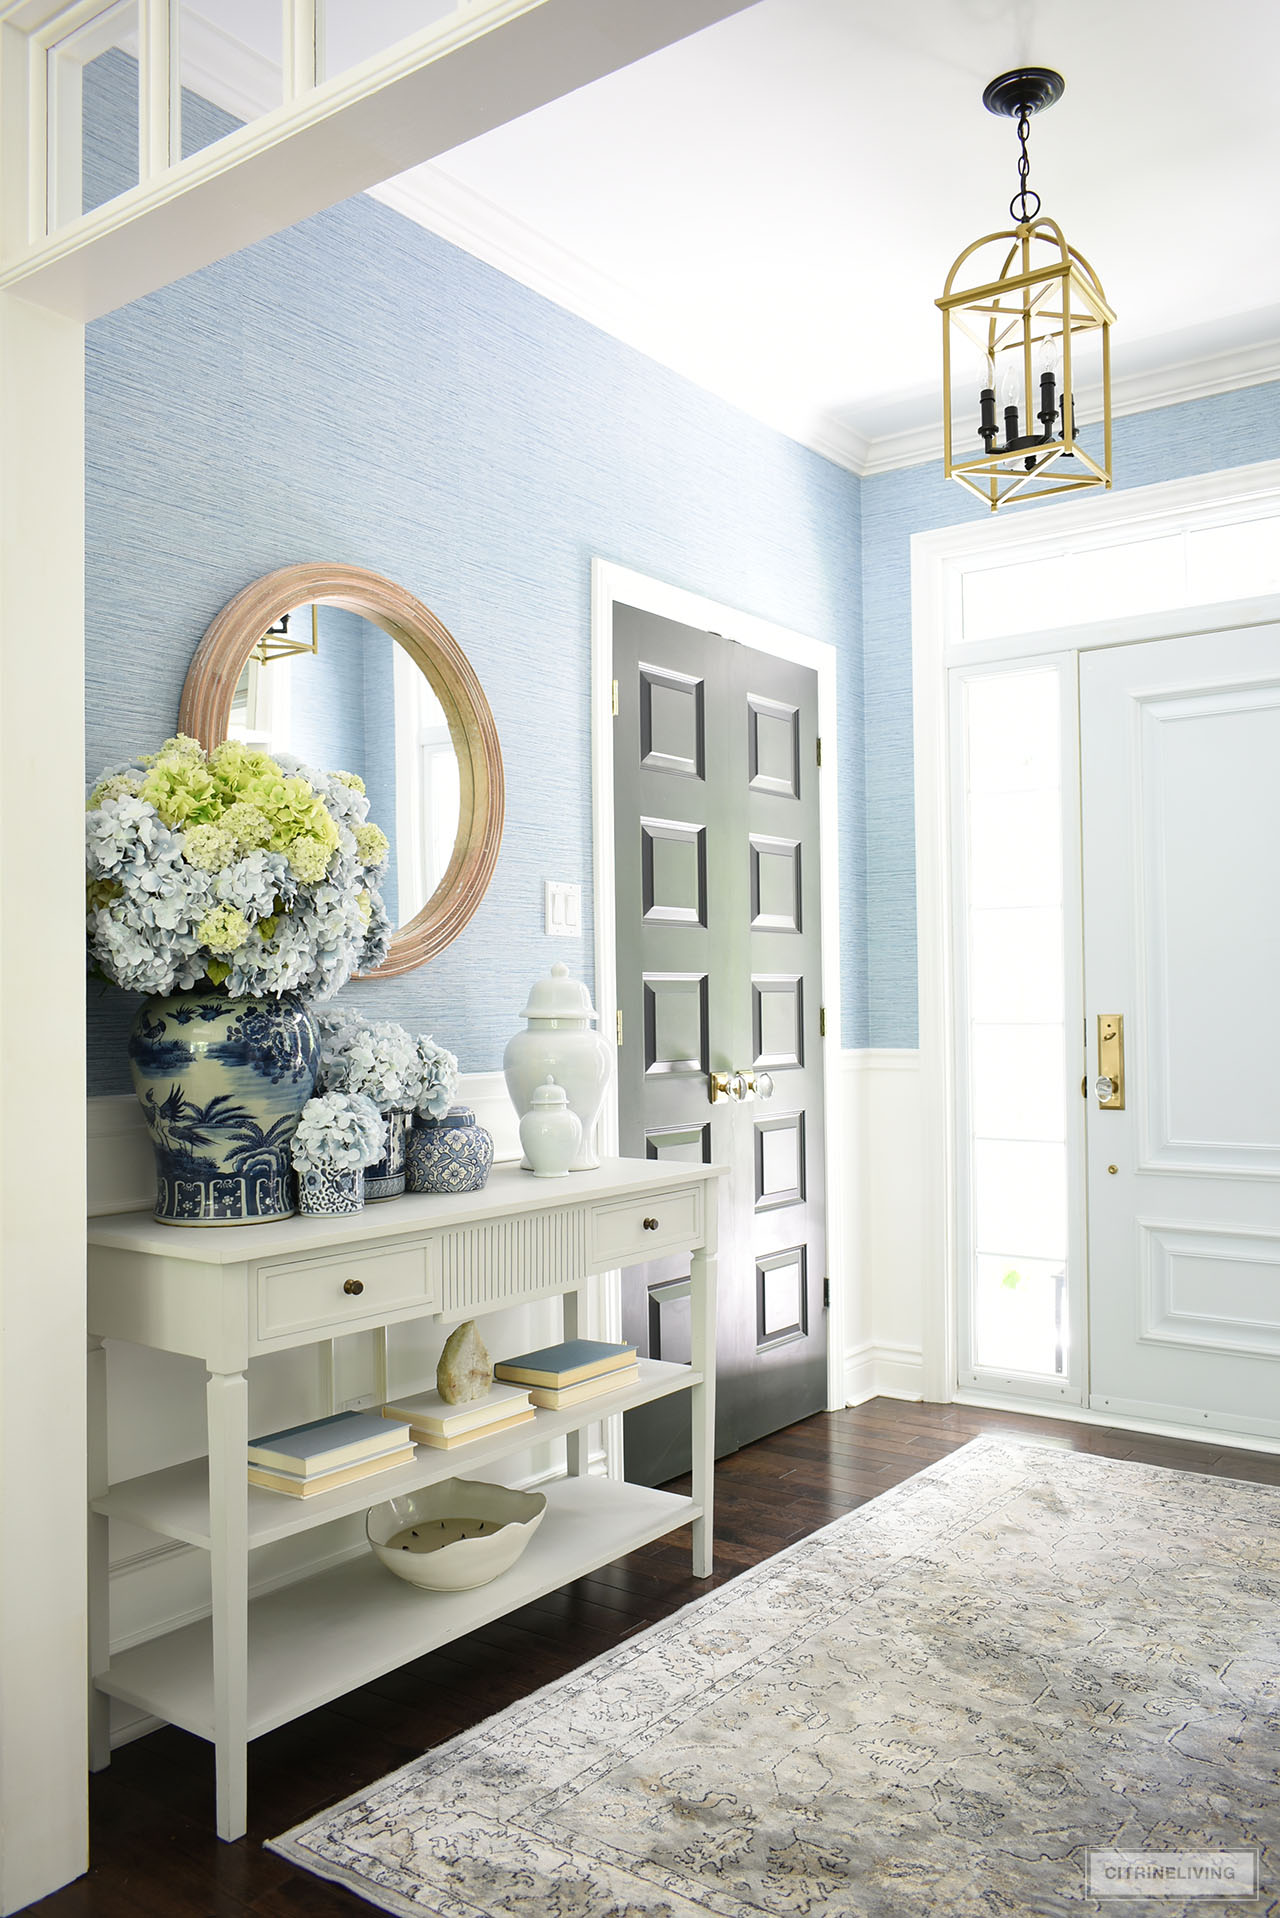 A bright and airy entryway with blue grasscloth is decorated for summer with gorgeous blue and white jars and vases arranged with gorgeous light blue and green hydrangeas.